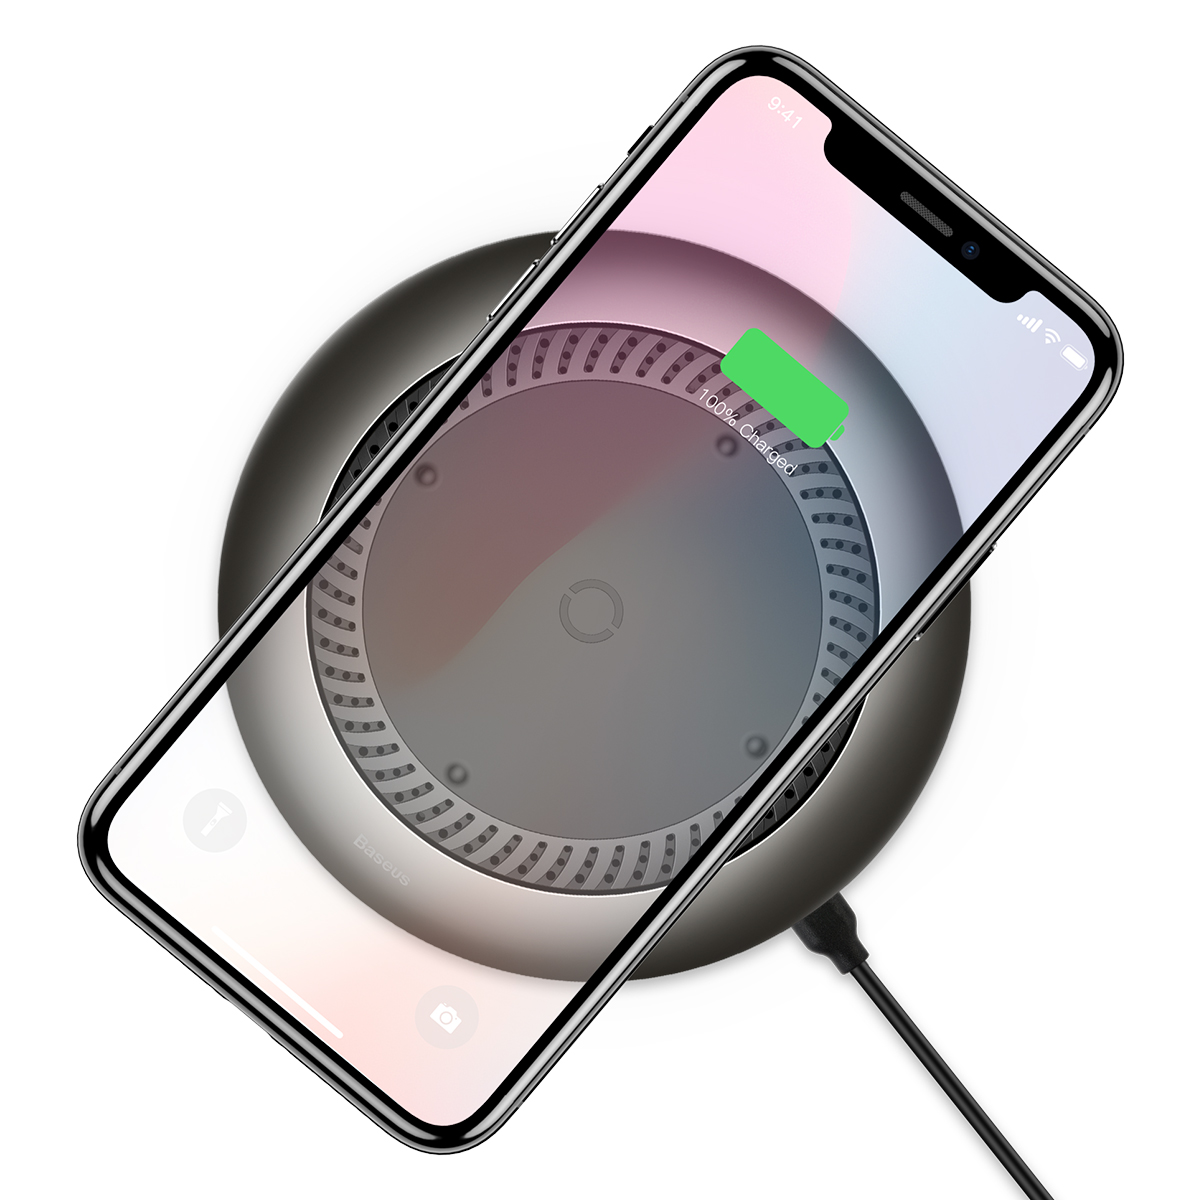 

Baseus Tornado 10W 7.5W Fast Charge Qi Wireless Charger Pad with Cooler Fan for iPhone X 8 Plus S9